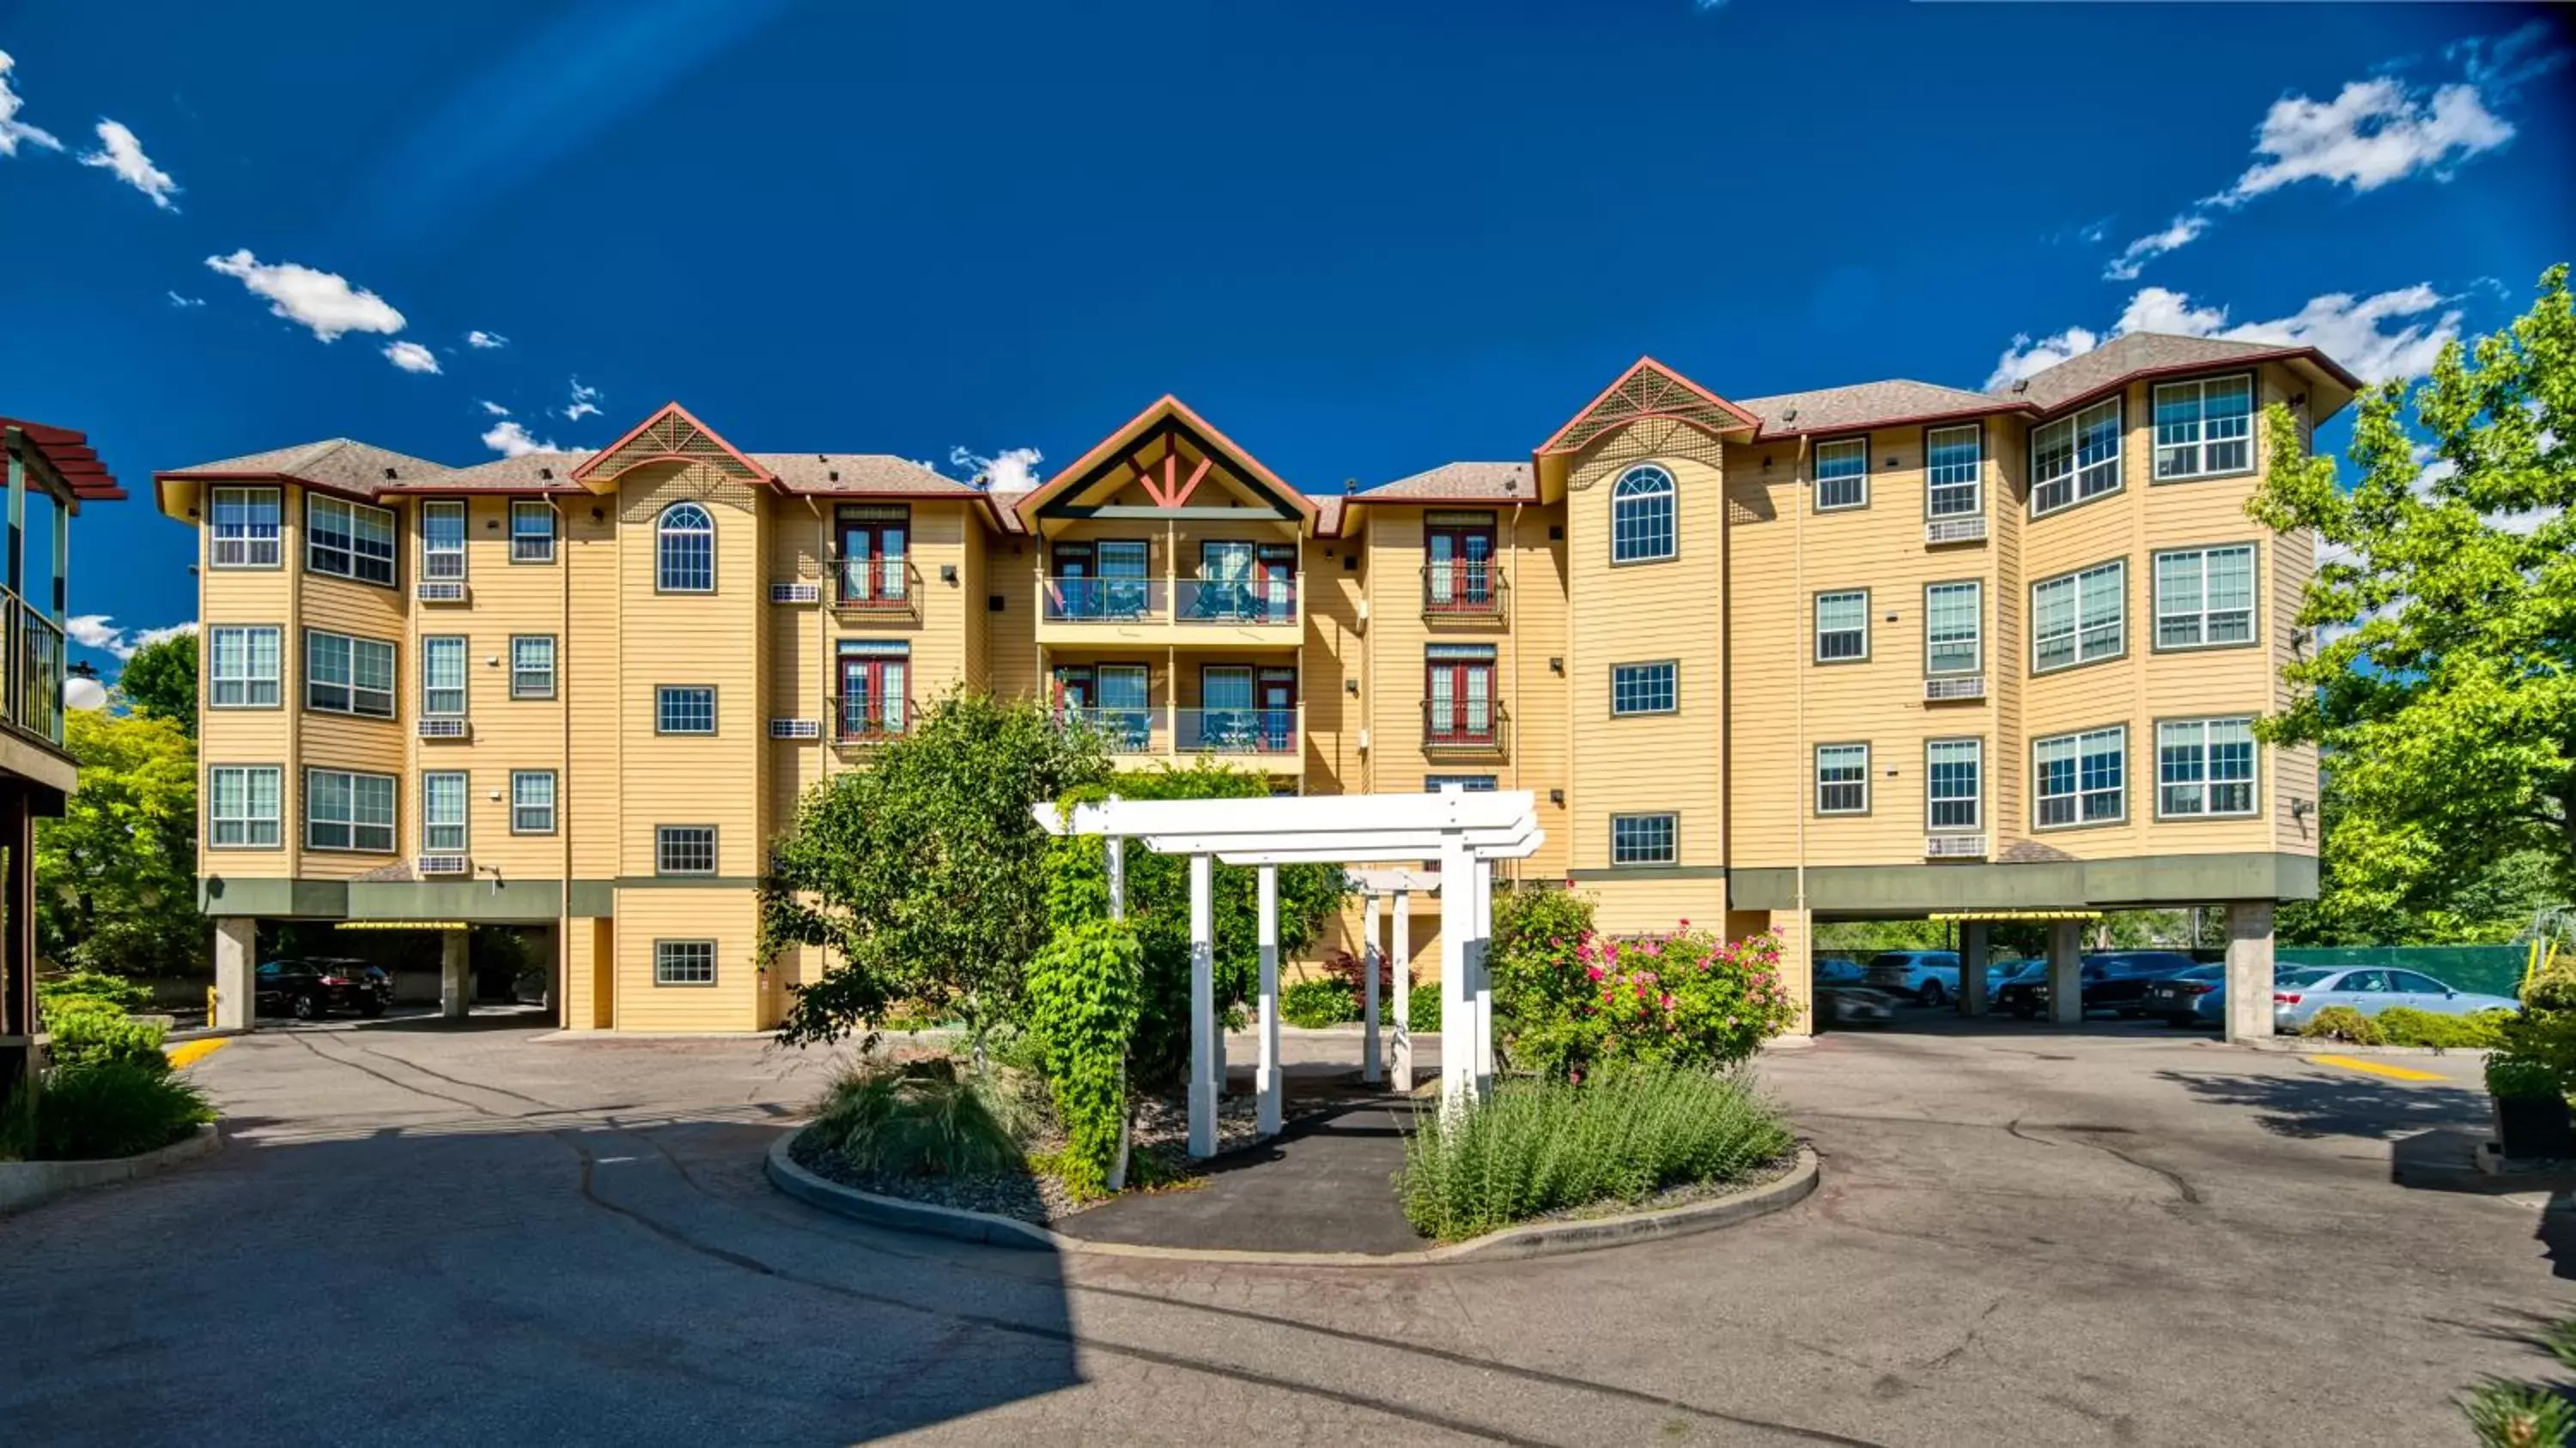 Property Building in Ramada by Wyndham Penticton Hotel & Suites